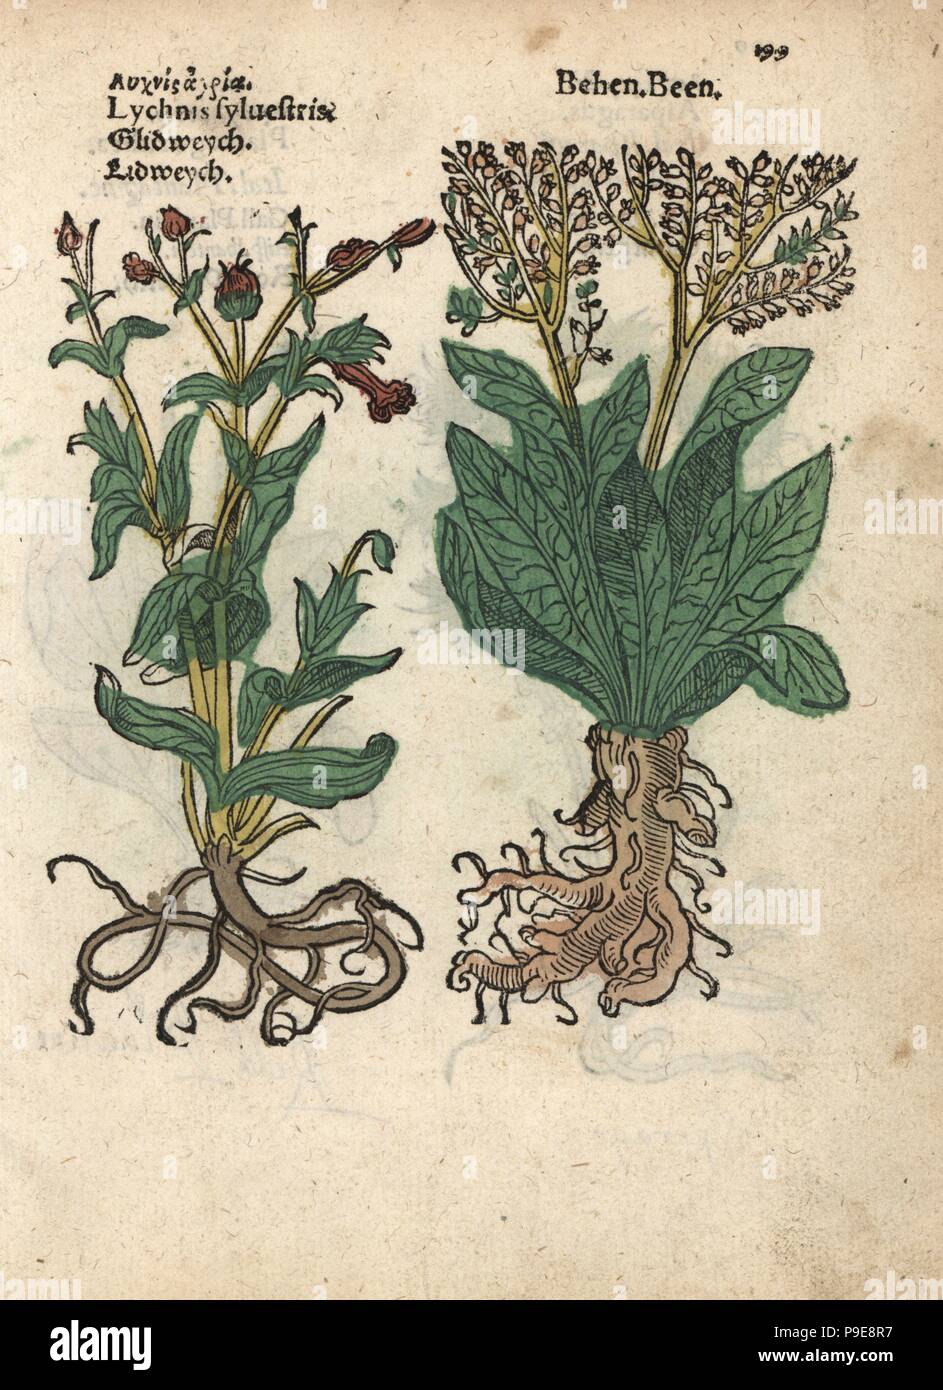 Red campion, Silene dioica, and white behmen, Centaurea behen. Handcoloured woodblock engraving of a botanical illustration from Adam Lonicer's Krauterbuch, or Herbal, Frankfurt, 1557. This from a 17th century pirate edition or atlas of illustrations only, with captions in Latin, Greek, French, Italian, German, and in English manuscript. Stock Photo